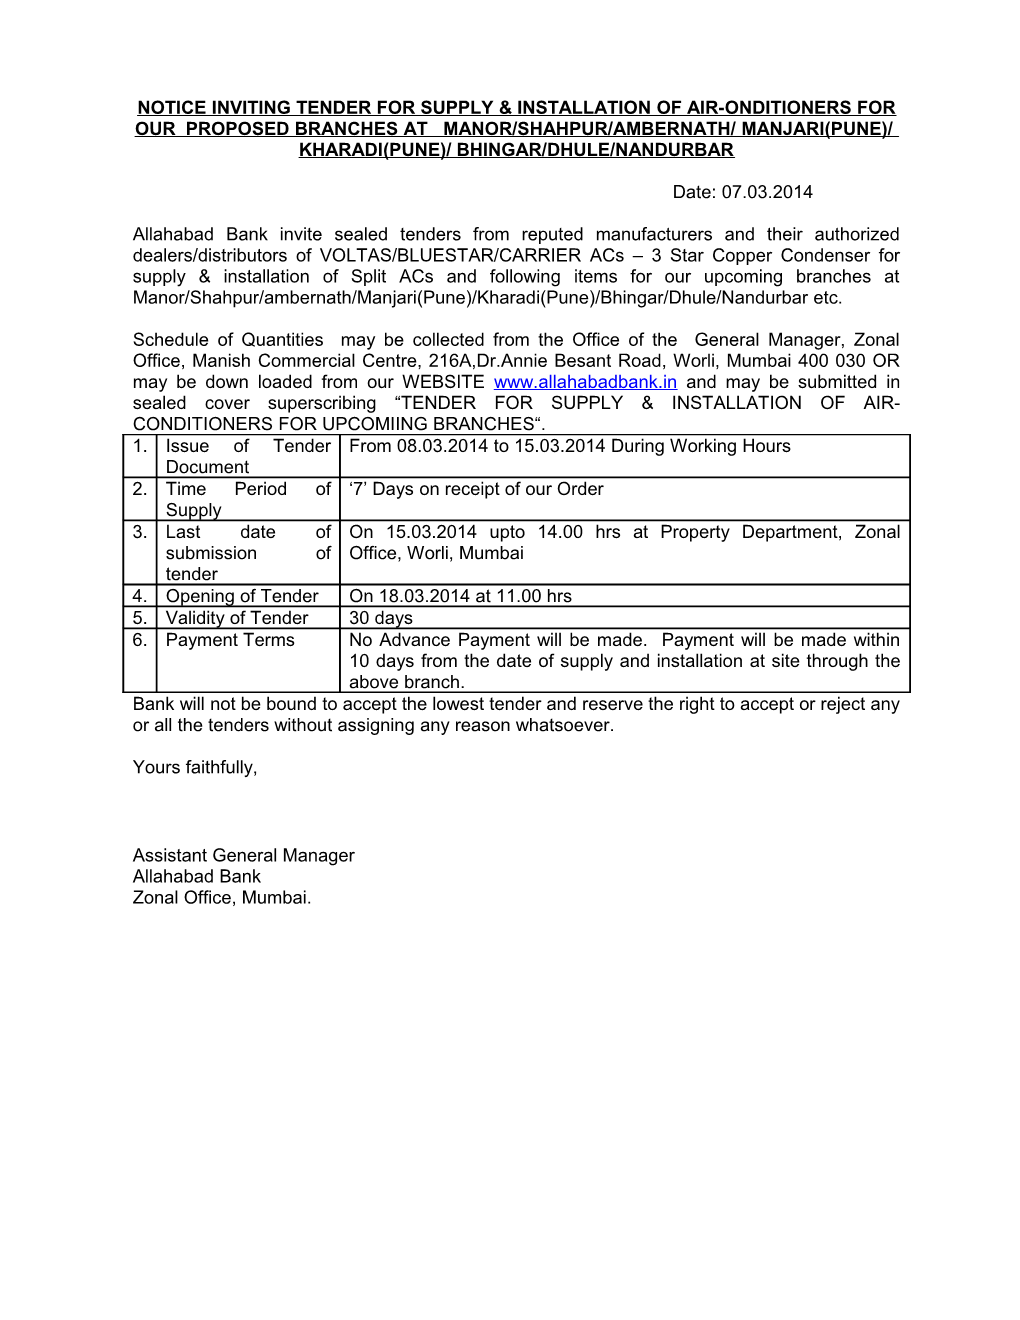 Notice Inviting Tender for Supply & Installation of Air-Conditioners for Proposed